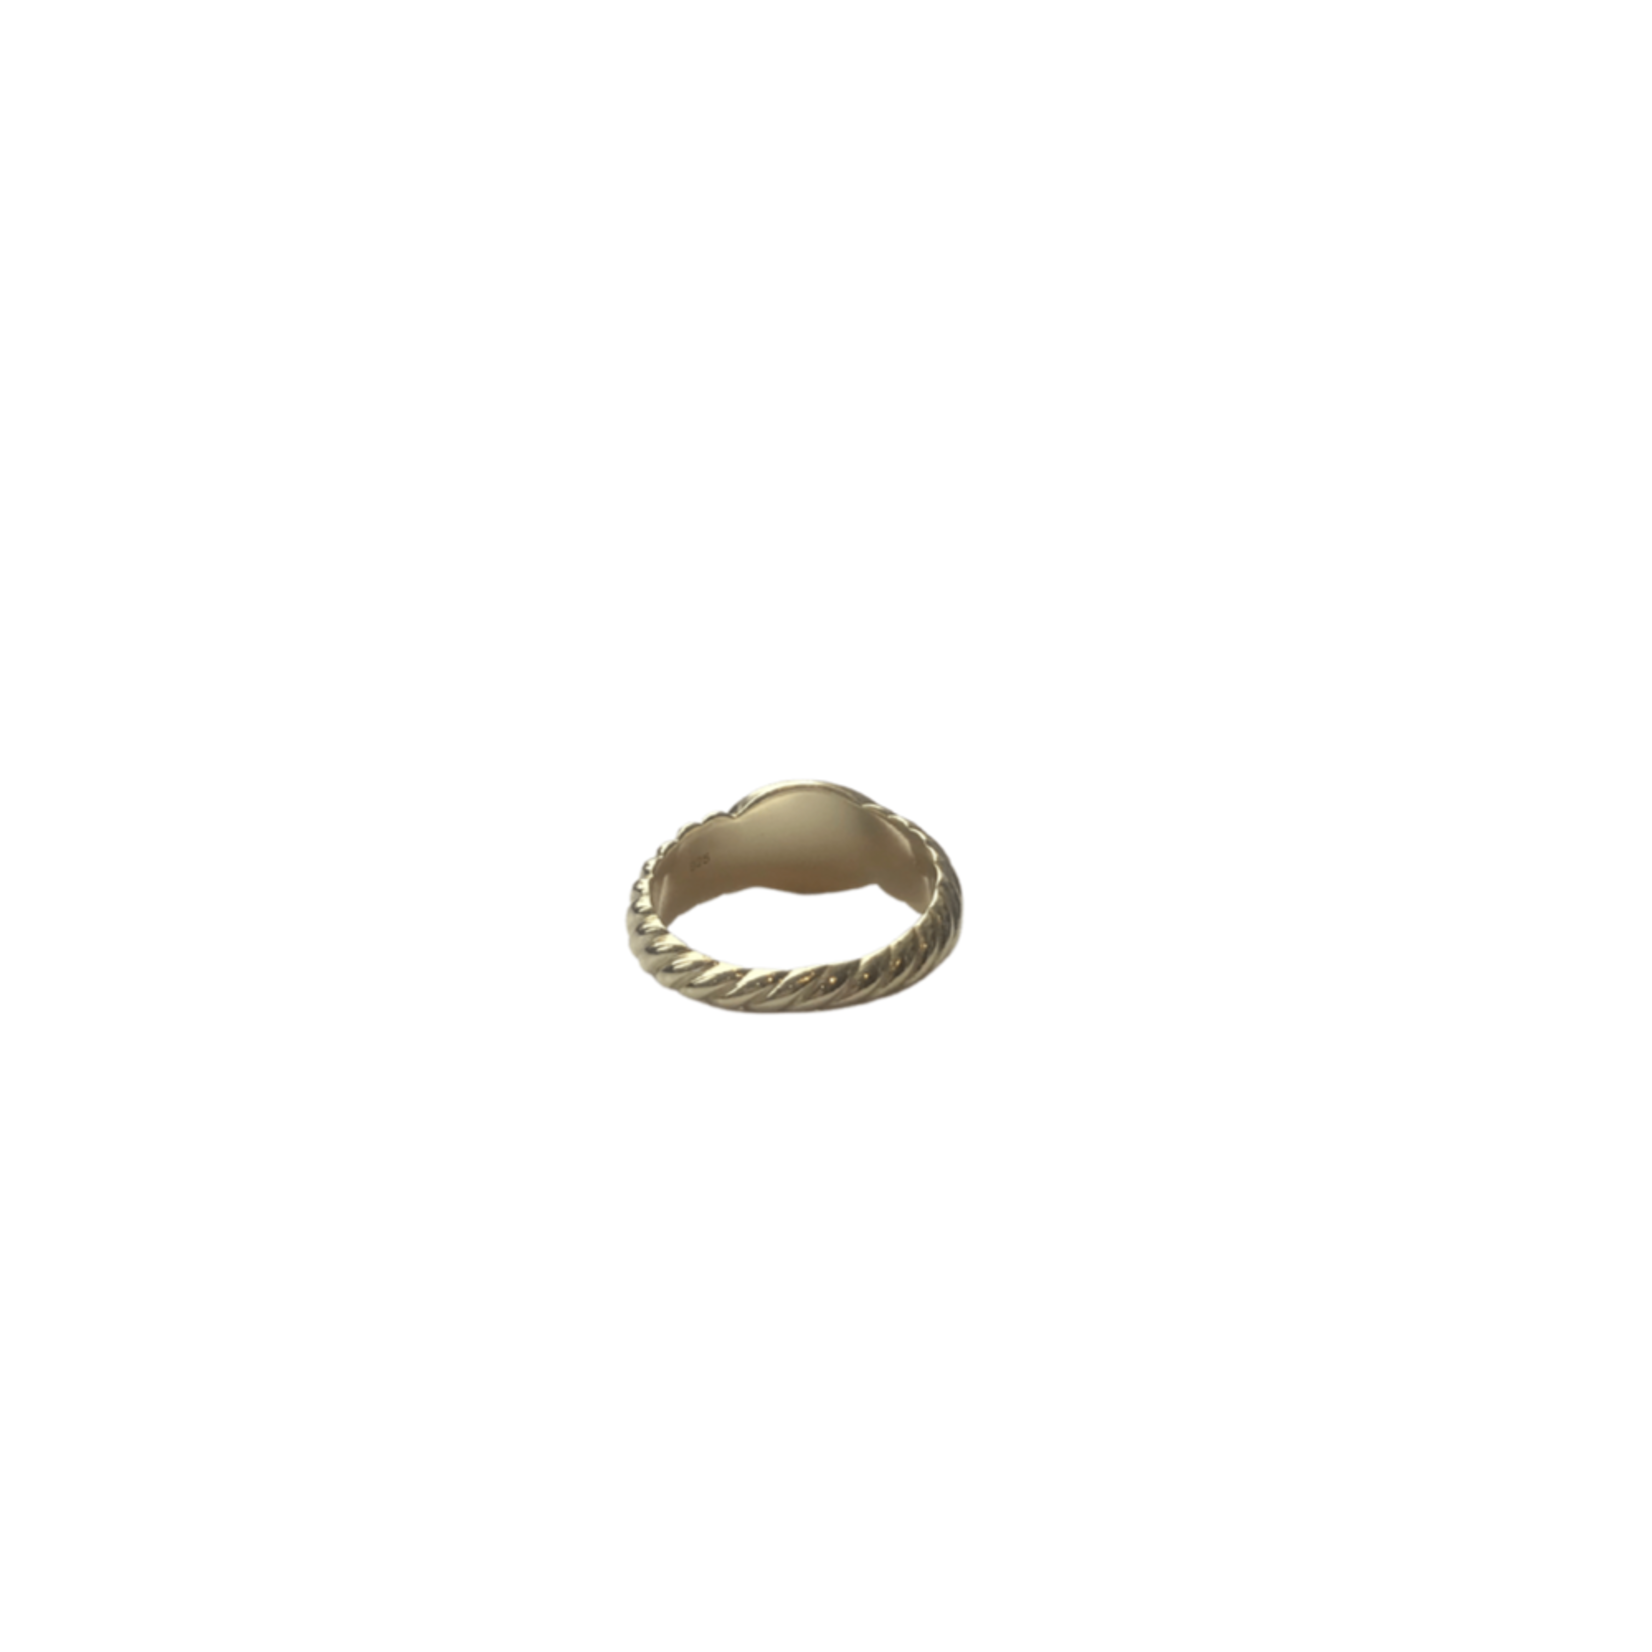 Wyld Blue Twisted Pinky Cignet Ring